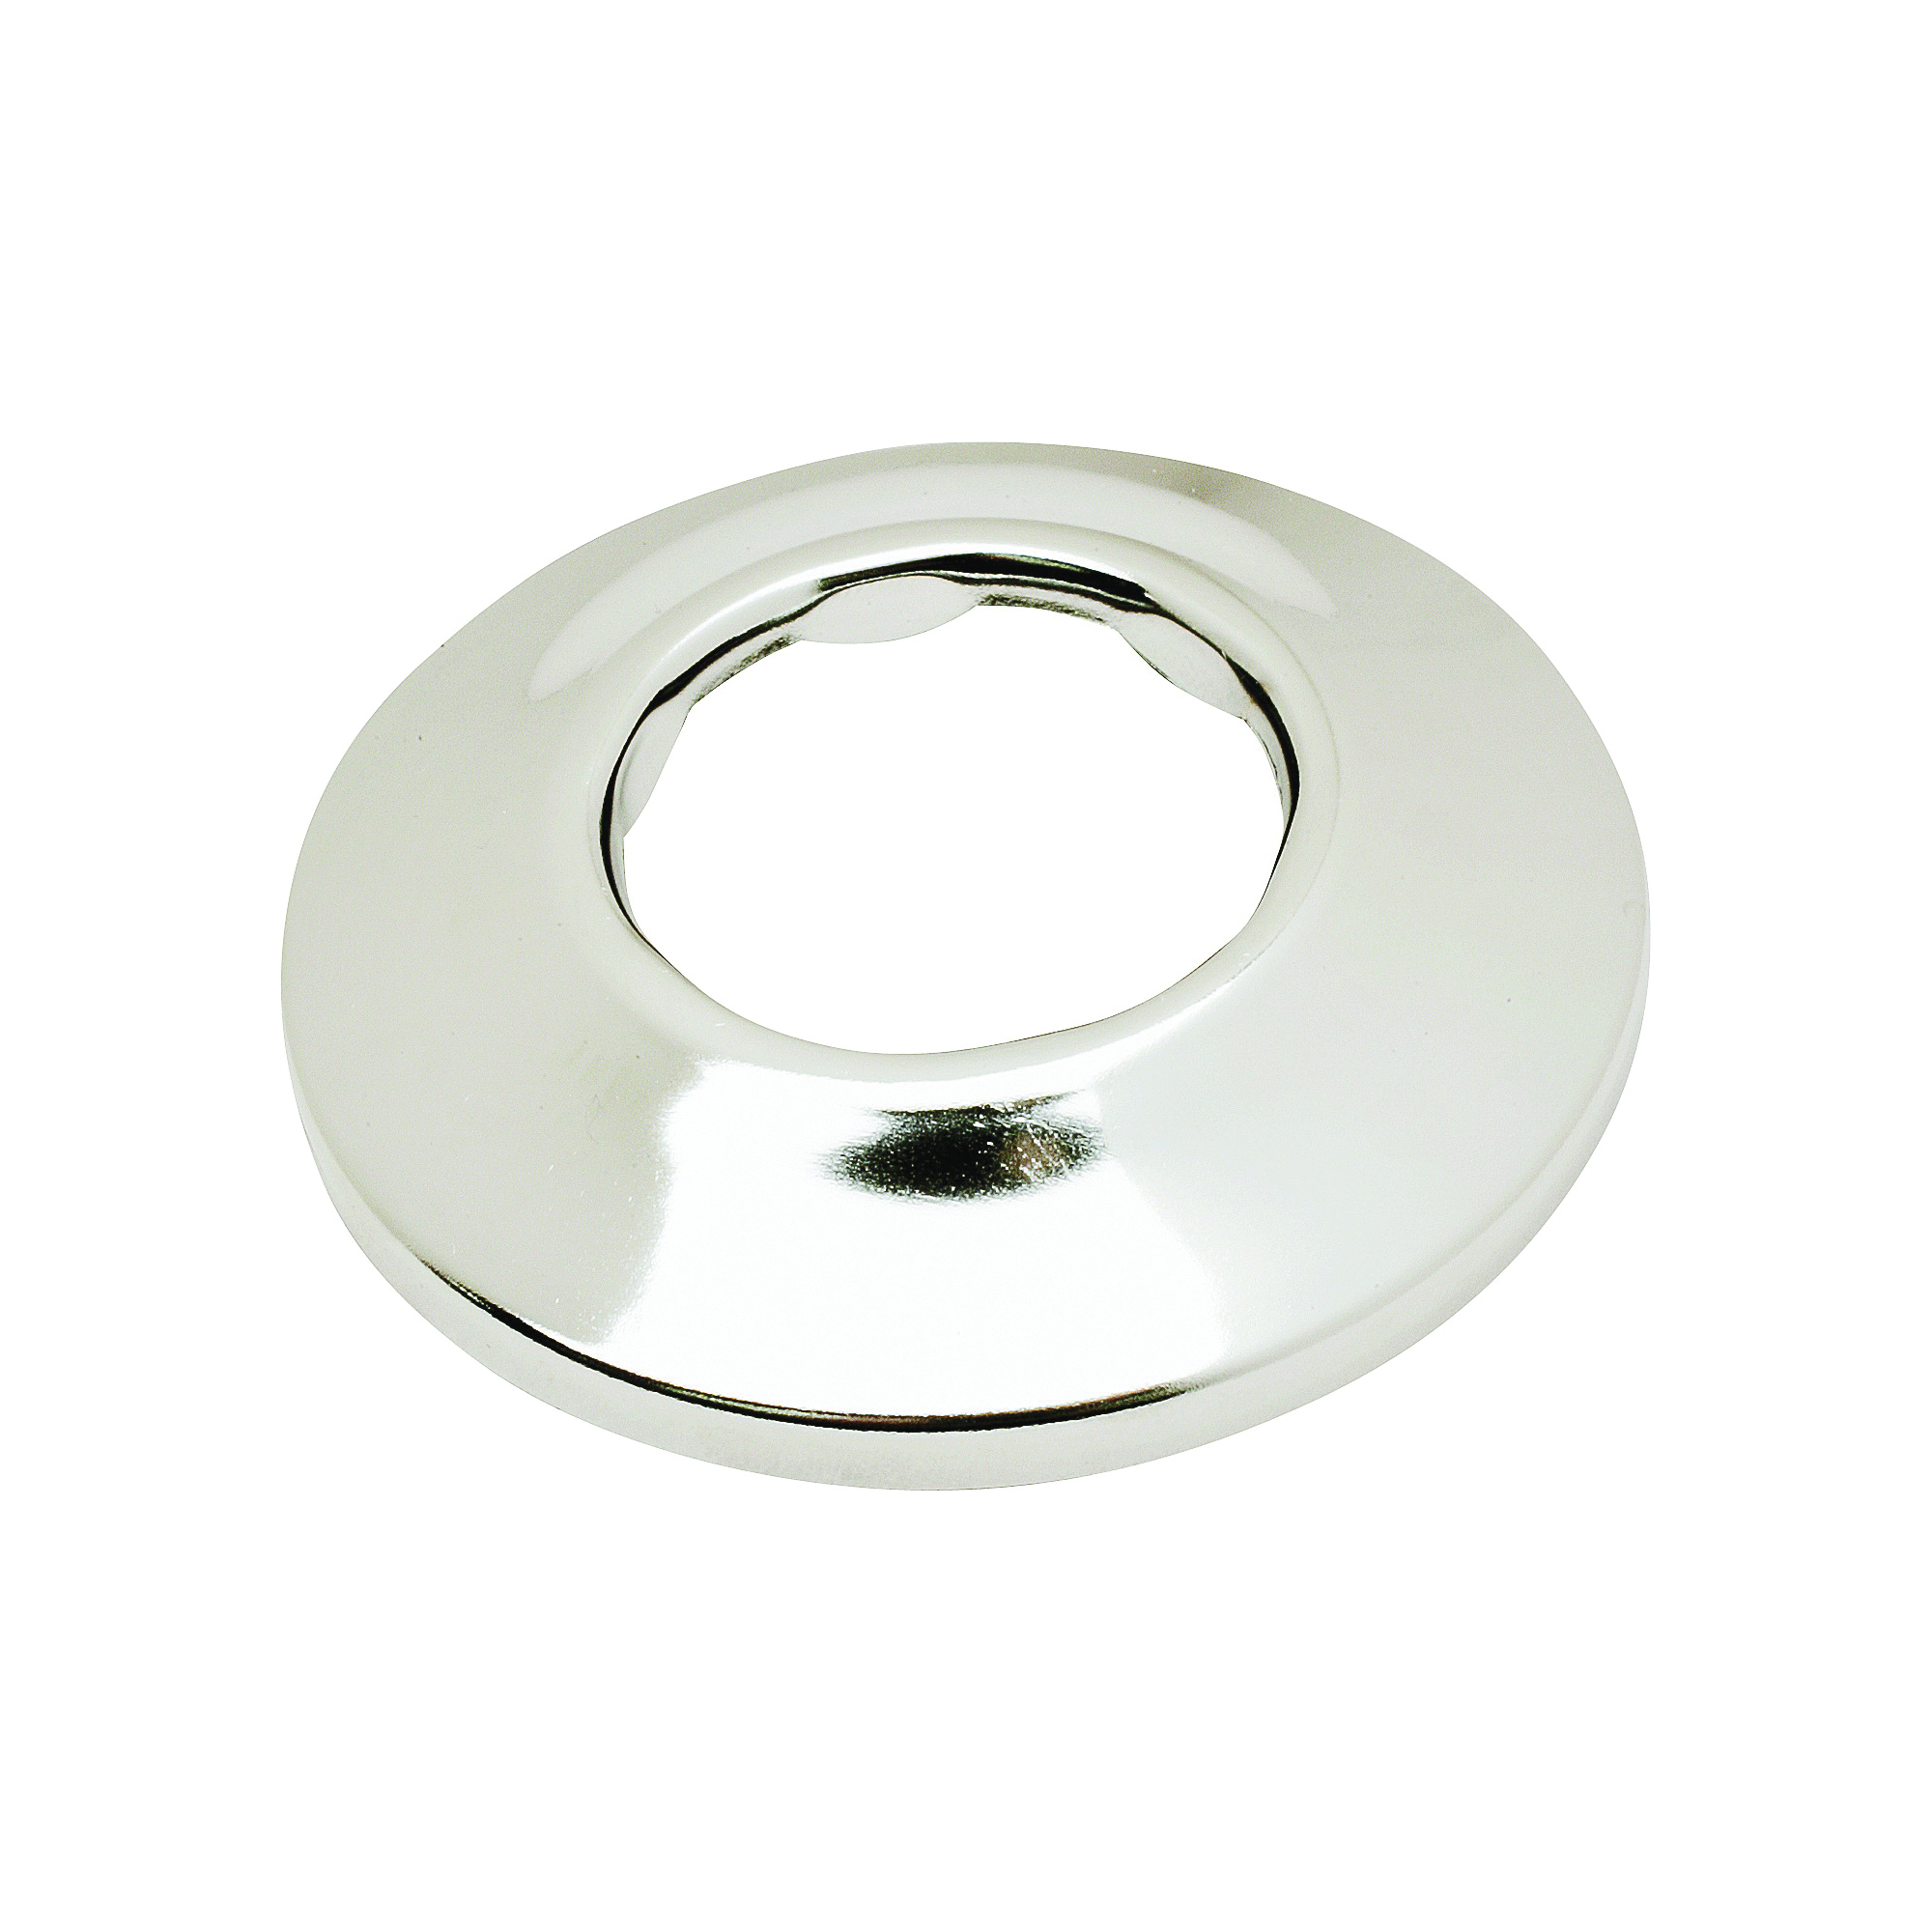 PP97PC Bath Flange, 3-3/4 in OD, For: 1-1/4 in Pipes, Chrome